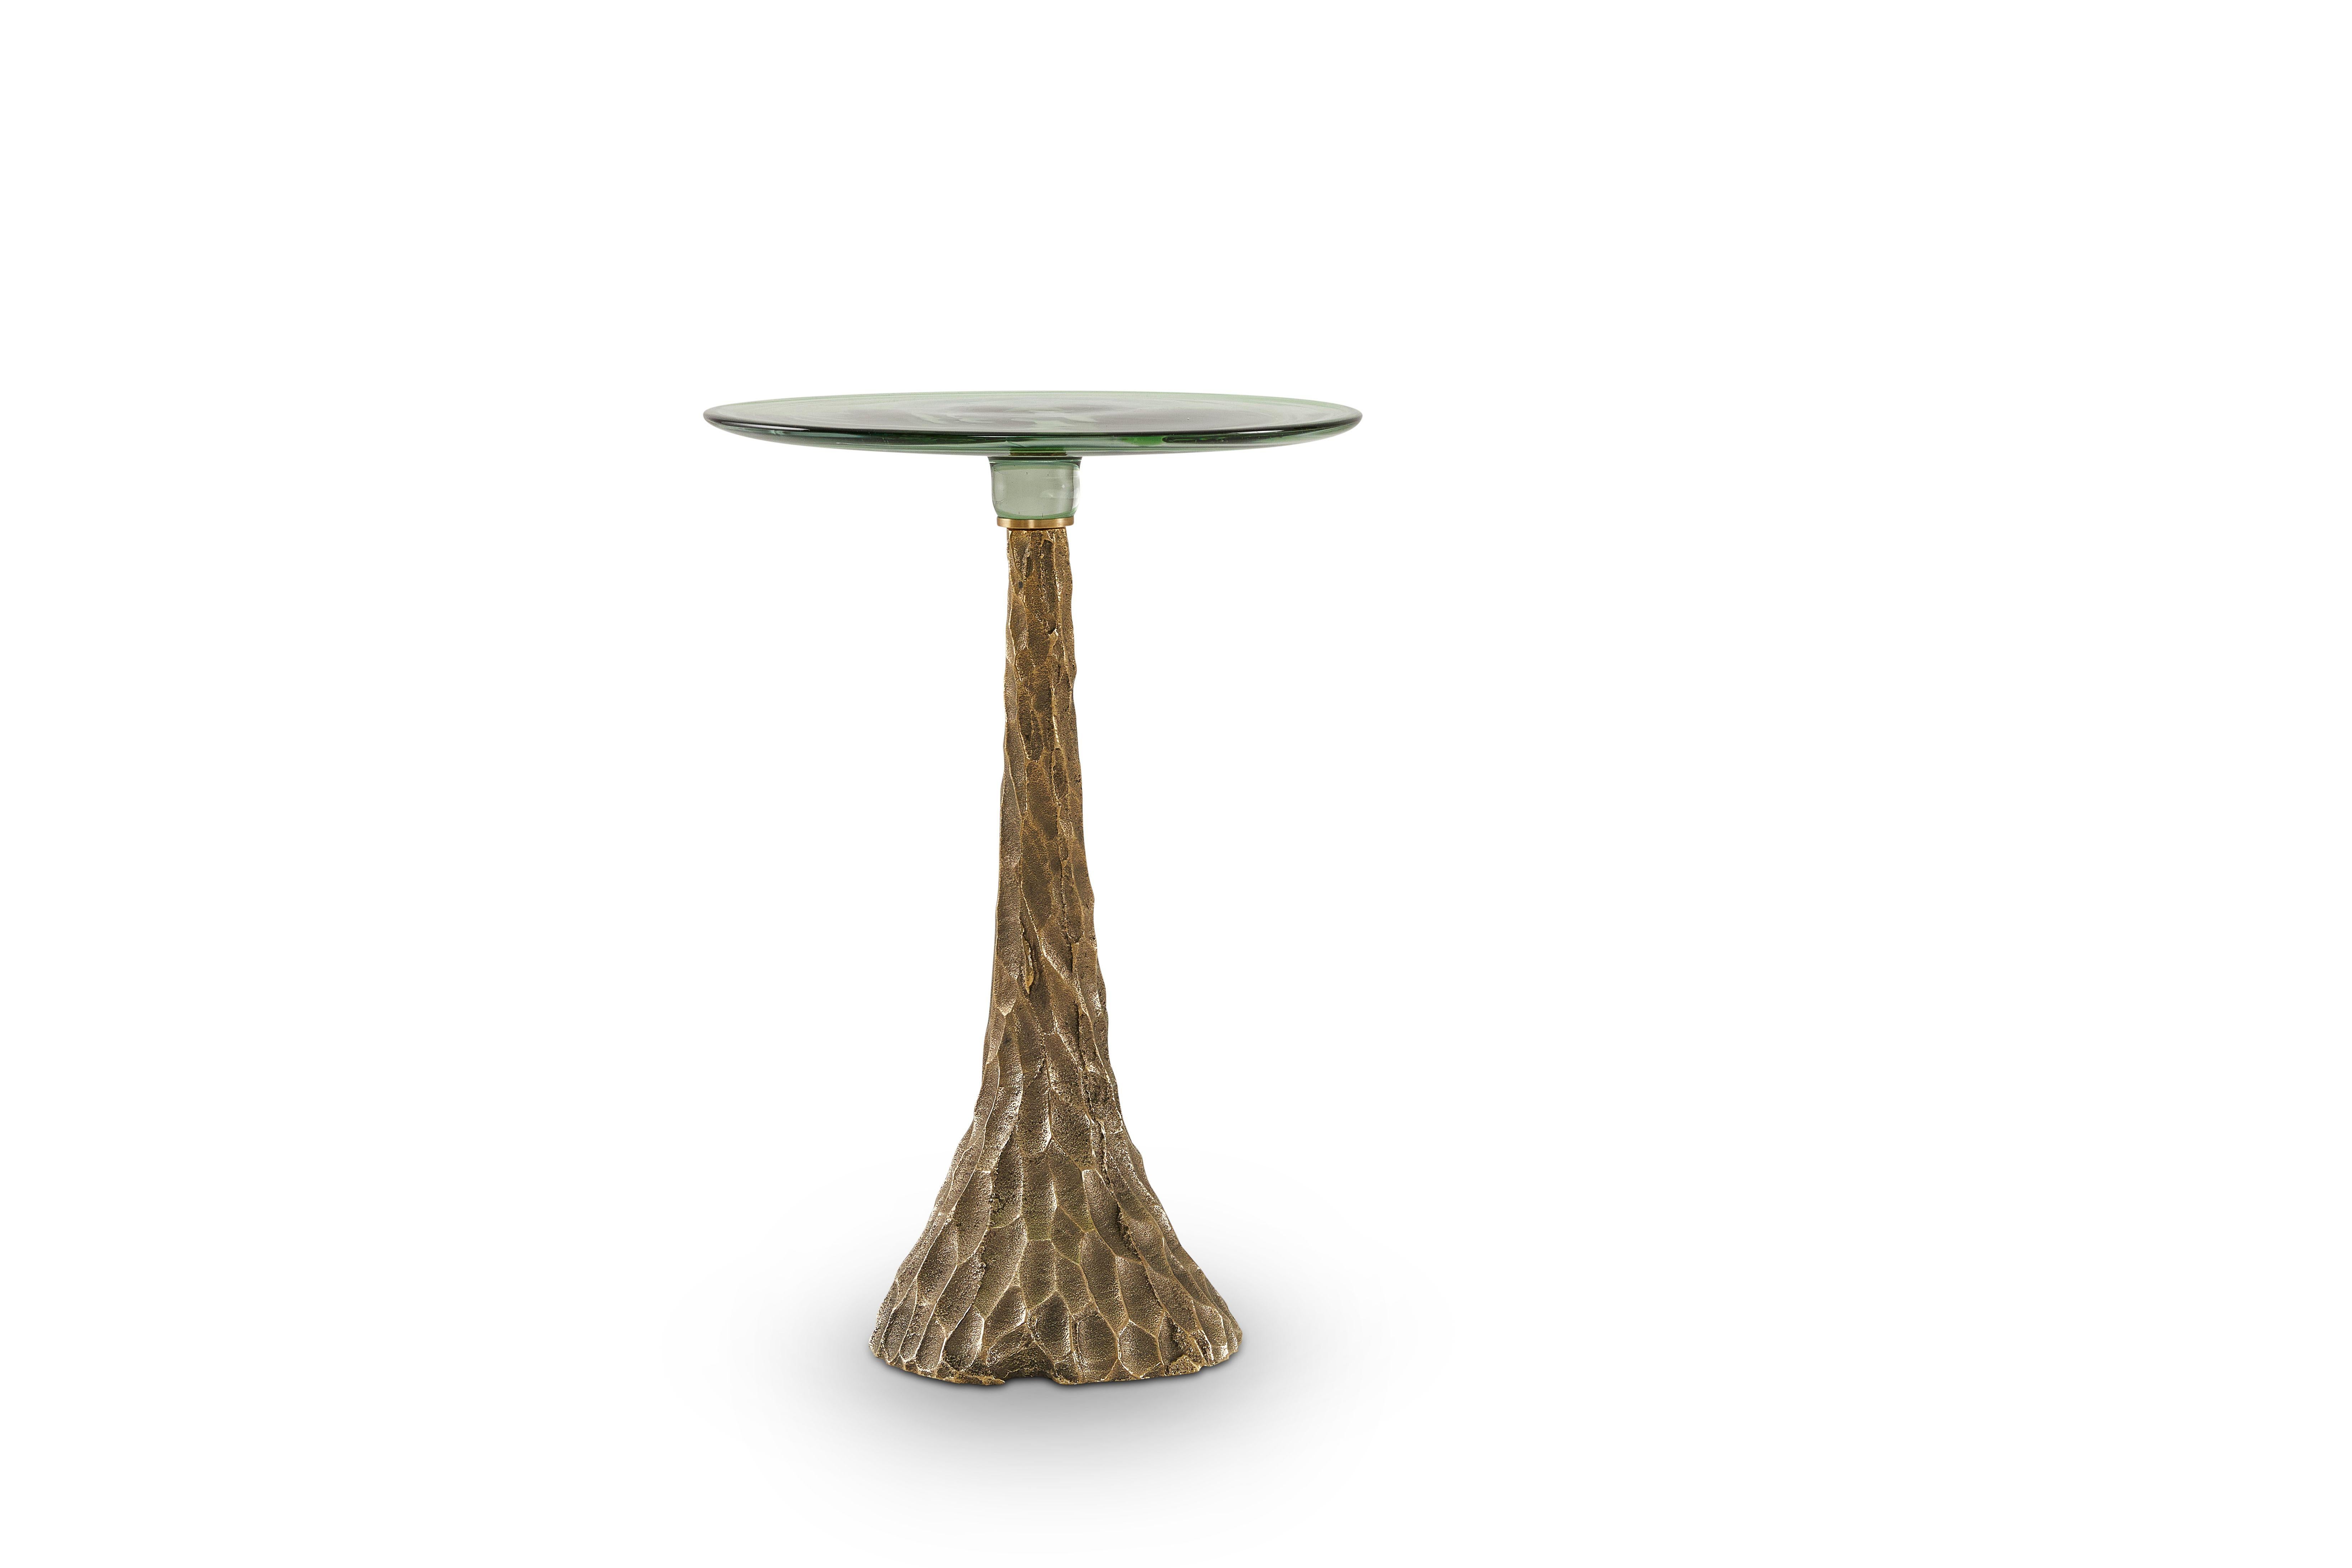 Trumpet Medium side table by Egg Designs
Dimensions: 38 L X 38 D X H 54 cm 
Materials: Solid Cast Brass, Hand Blown Glass

Founded by South Africans and life partners, Greg and Roche Dry - Egg is a unique perspective in contemporary furniture